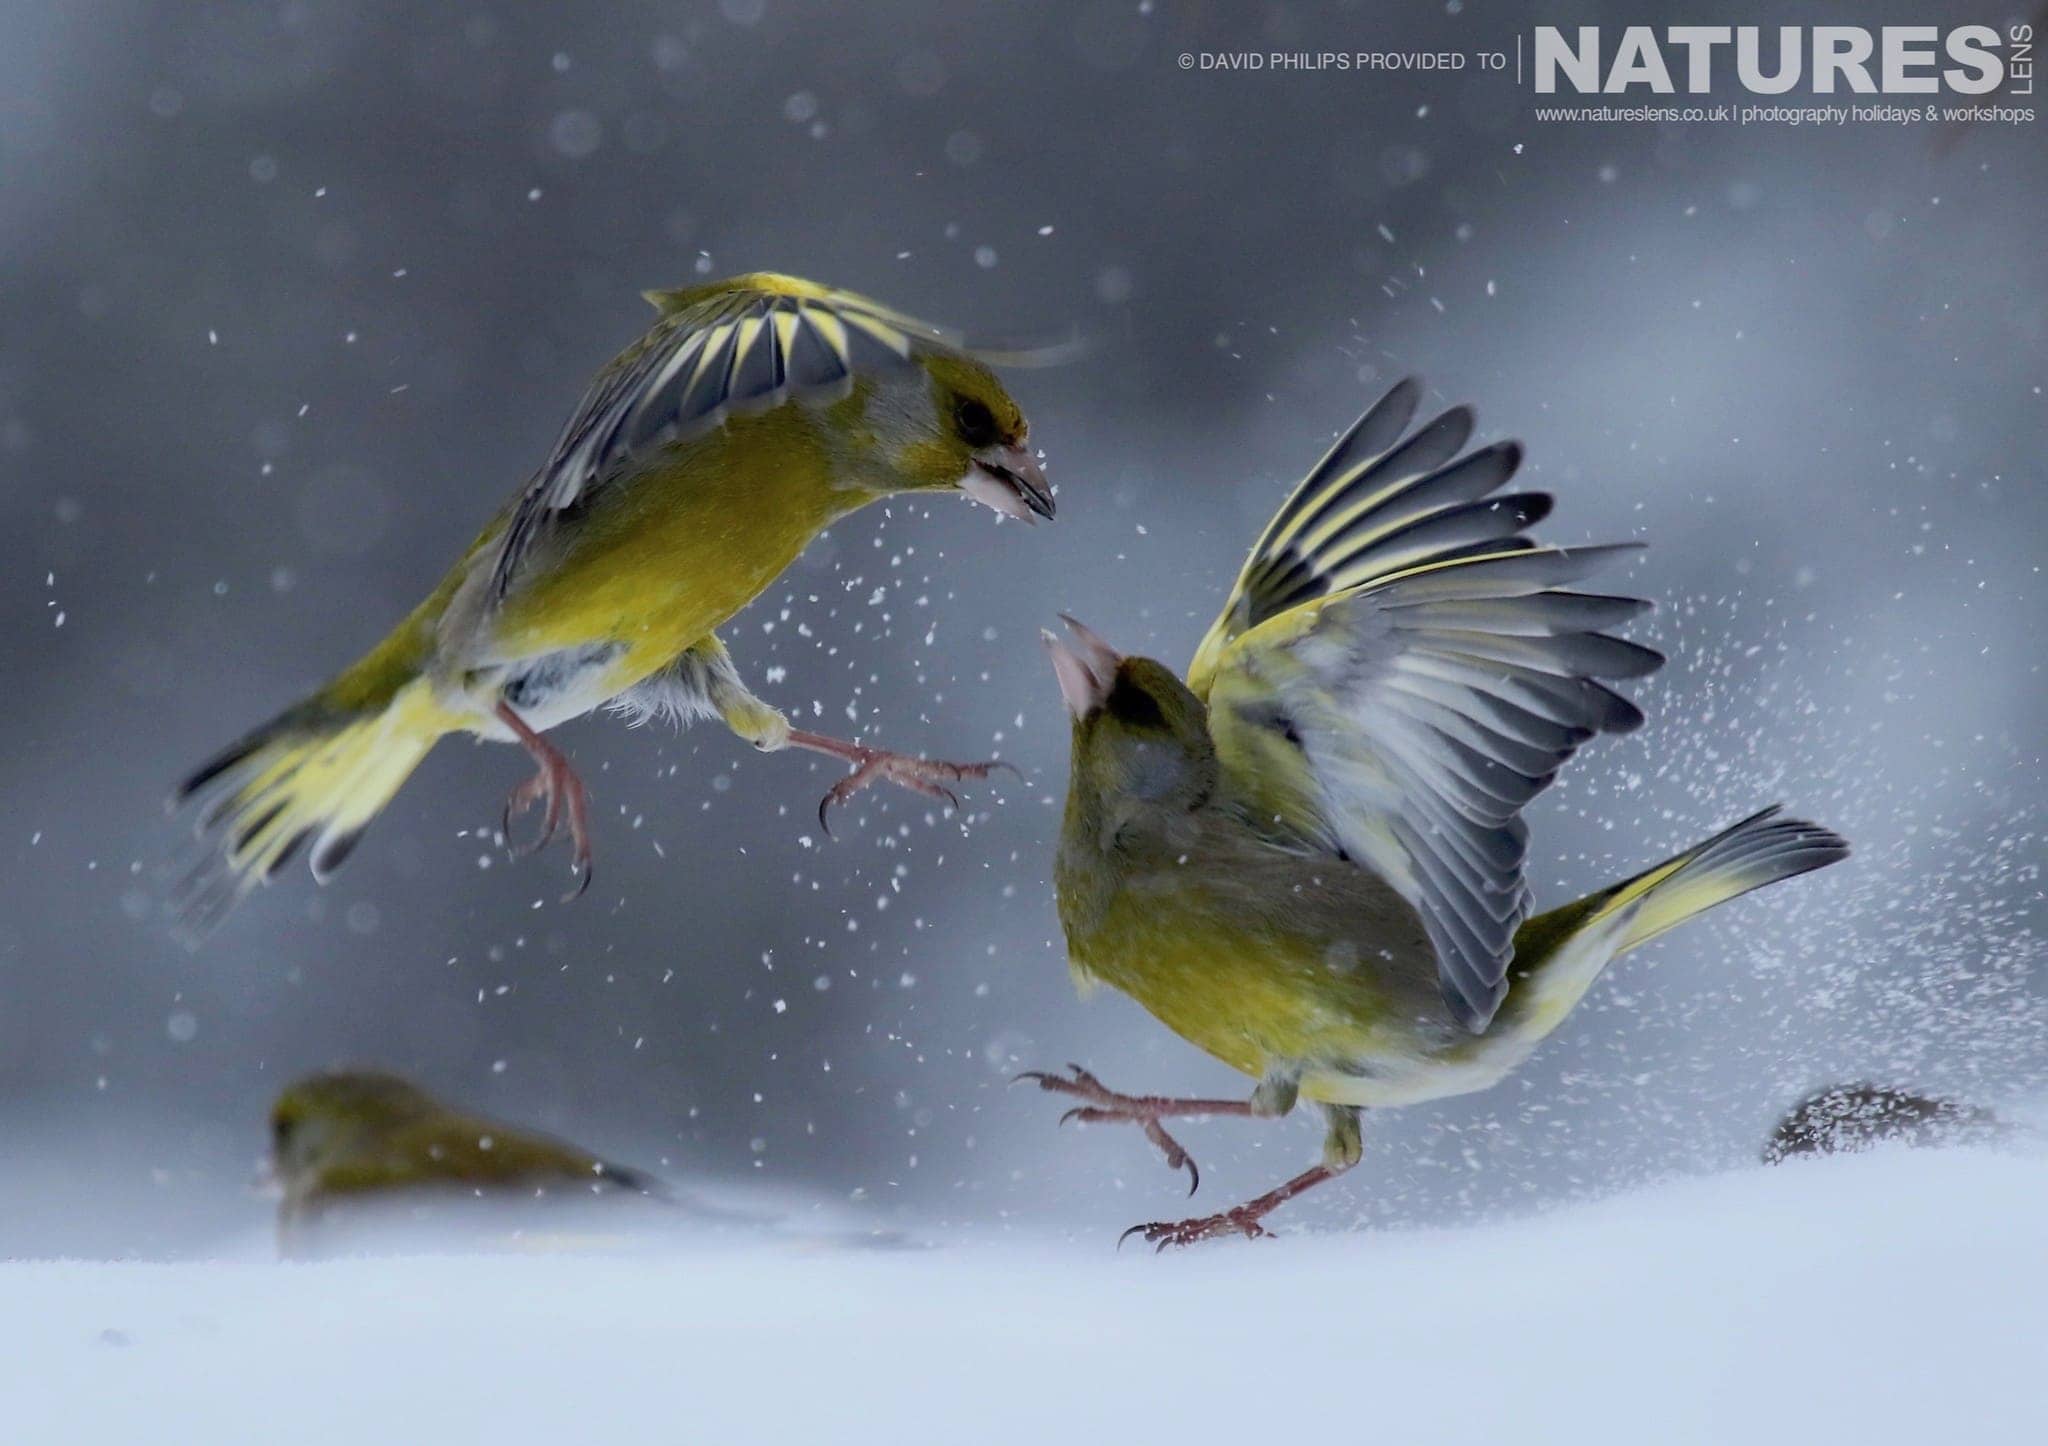 A Pair Of Siskins Squabble In The Snow Image Captured During The Natureslens Golden Eagles Of The Swedish Winter Photography Holiday